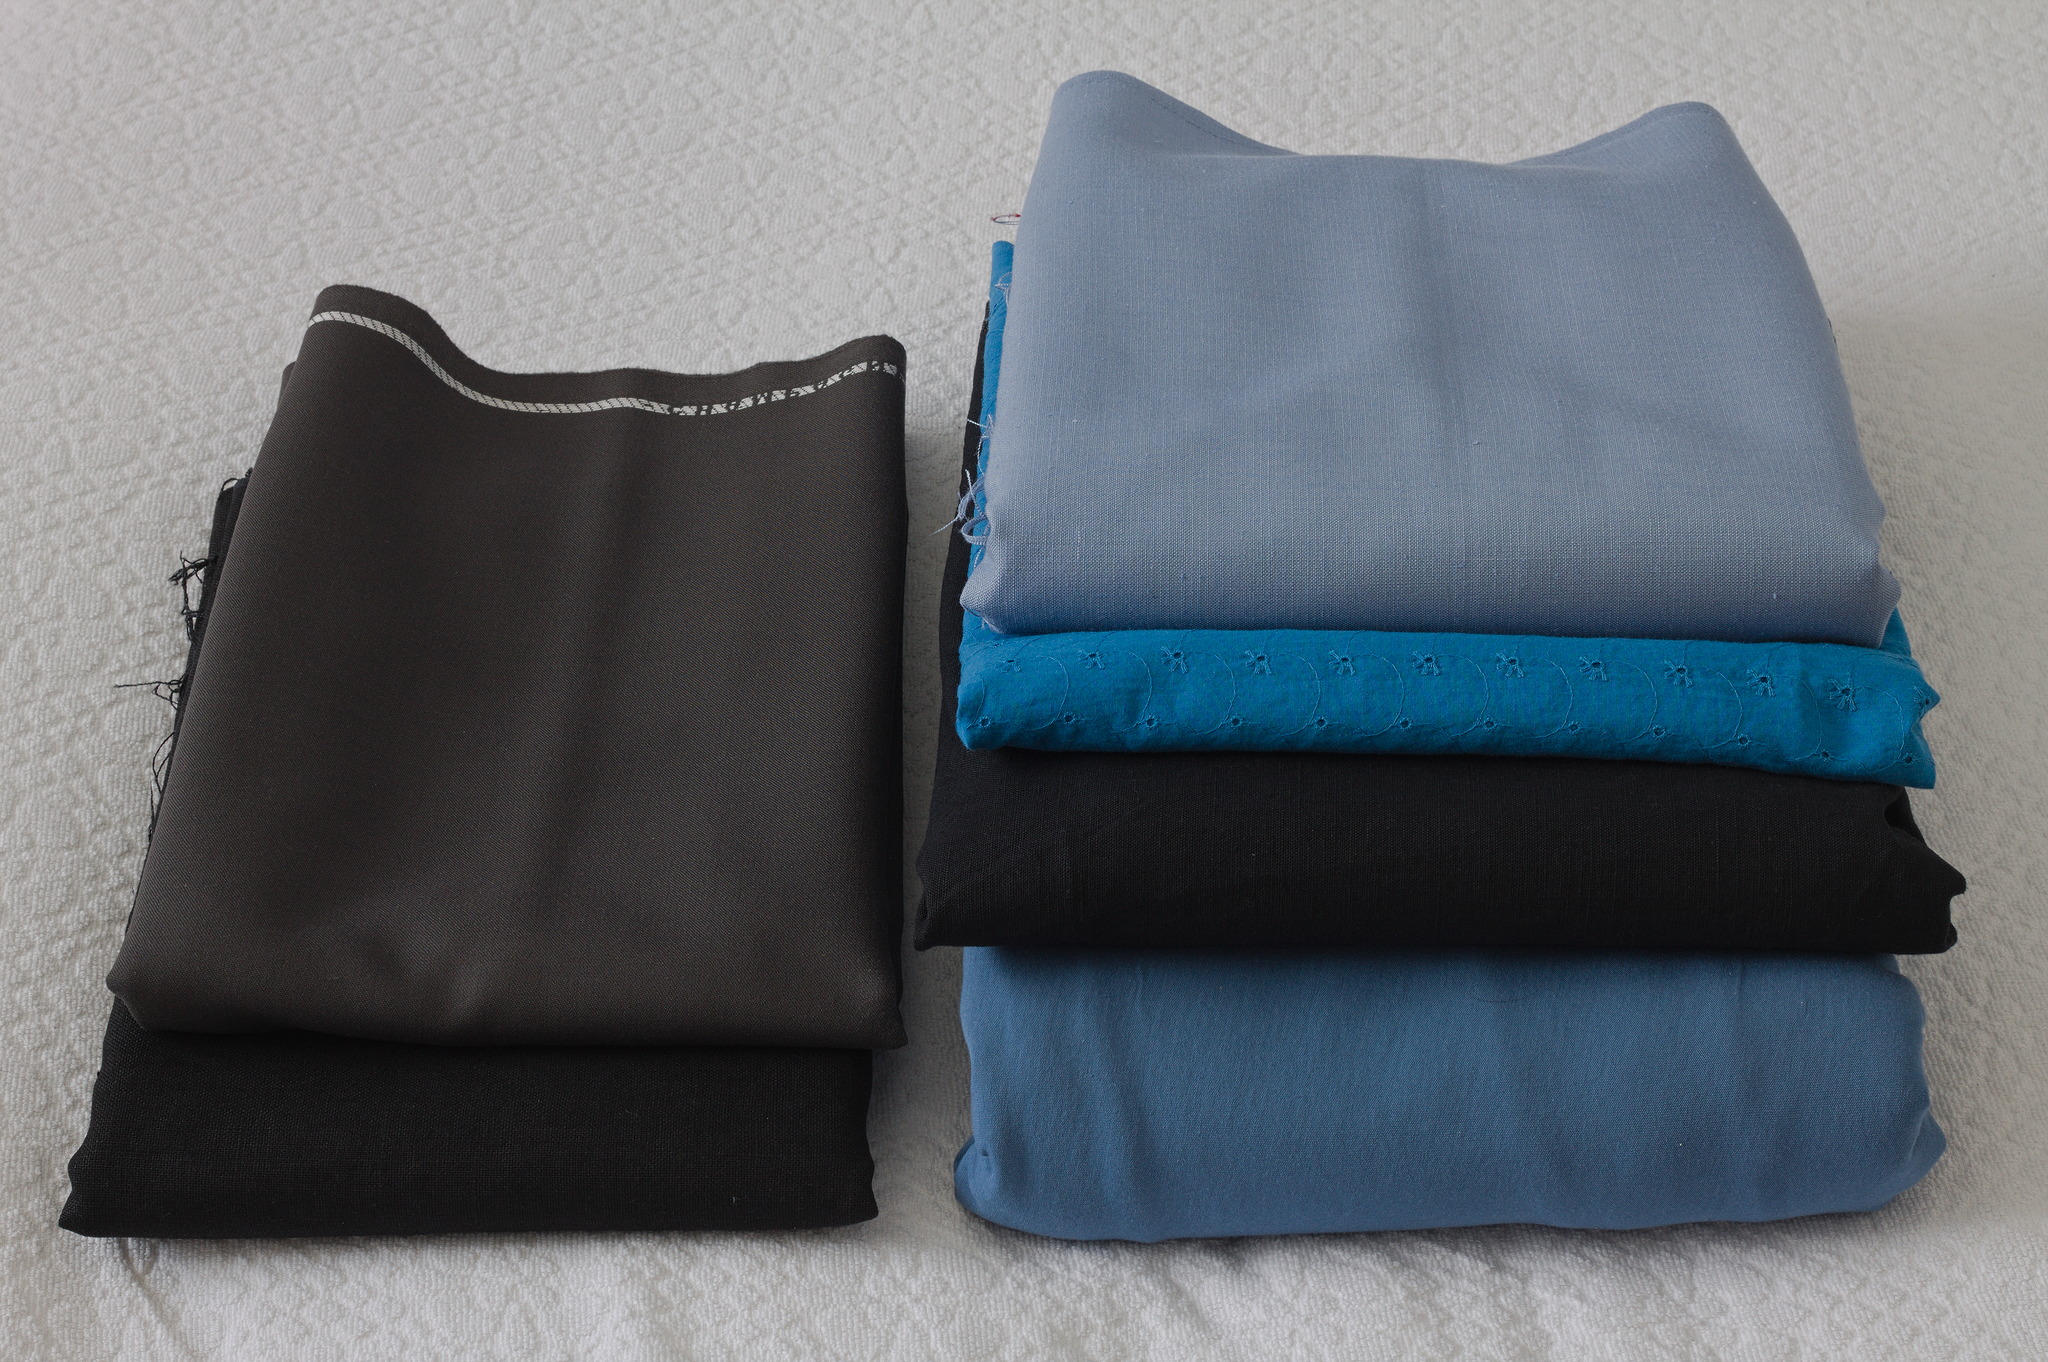 A surprisingly small pile of fabric; everything is blue or
black.